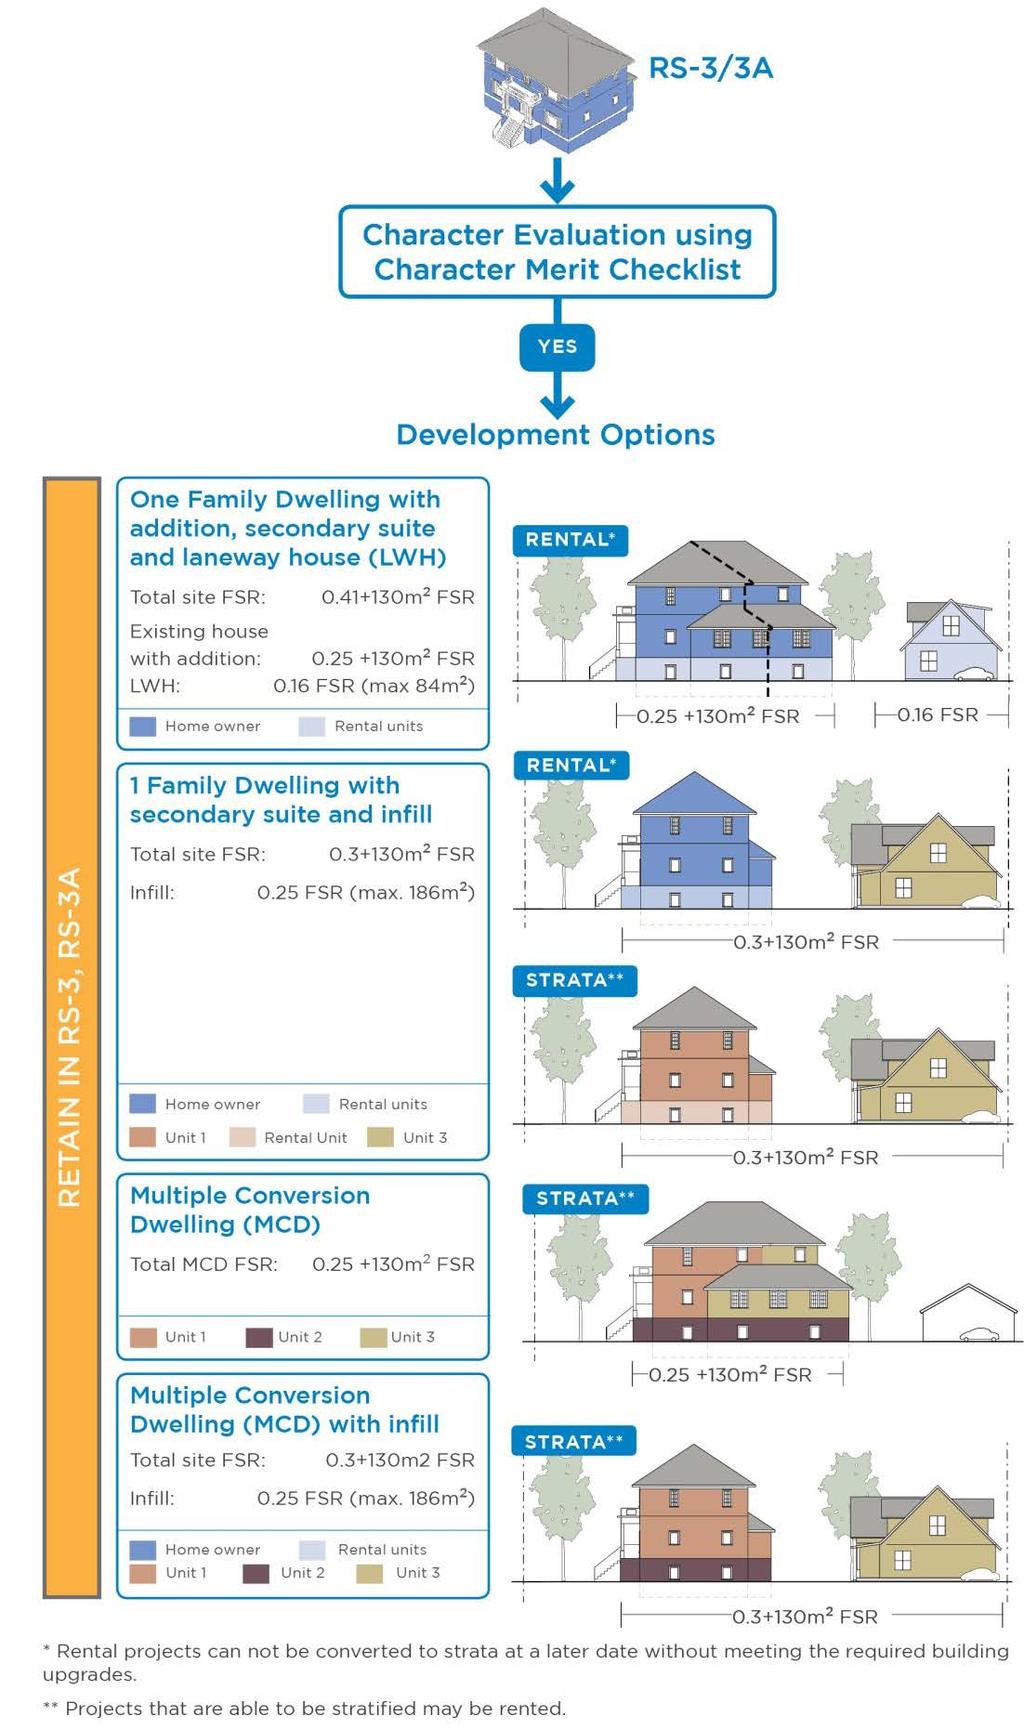 Figure 8 - Development Options for Character Houses in RS zones 3, 3/A